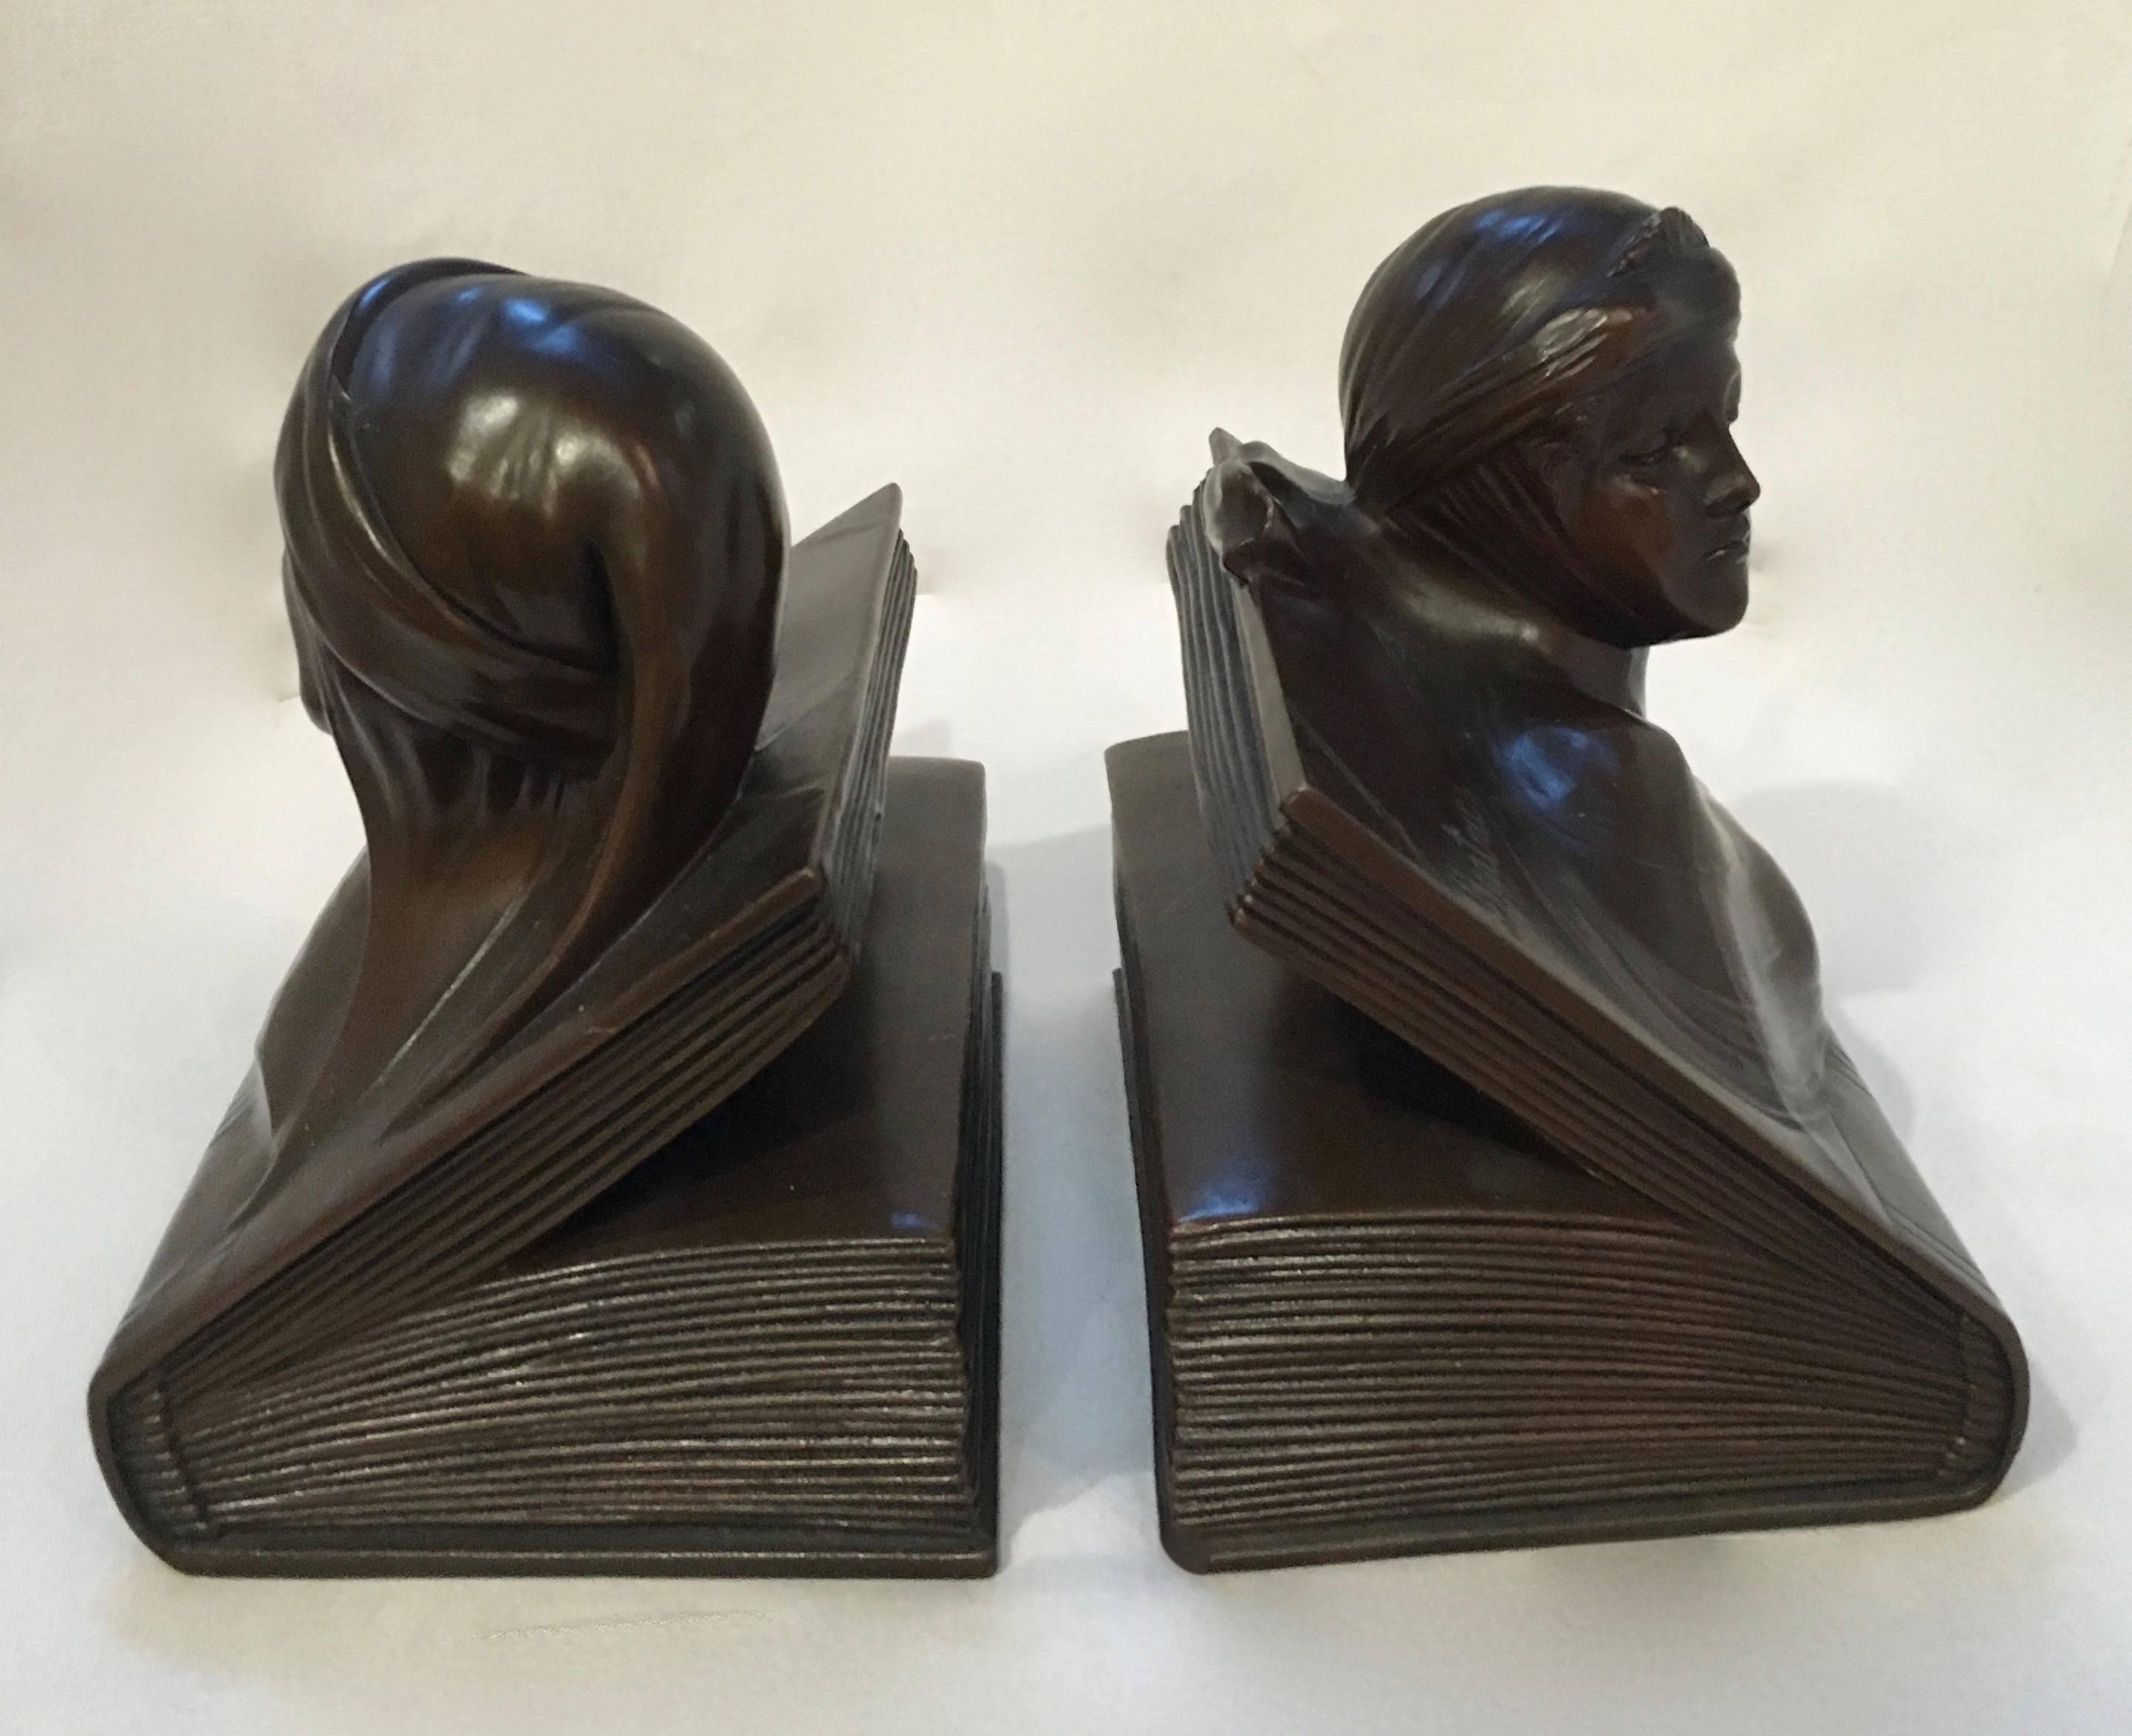 Pair of bookends with likeness of both Dante and Beatrice atop an opening book. The pair are known for their relationship to each other and poetry. A nice addition to any book shelf in any room.